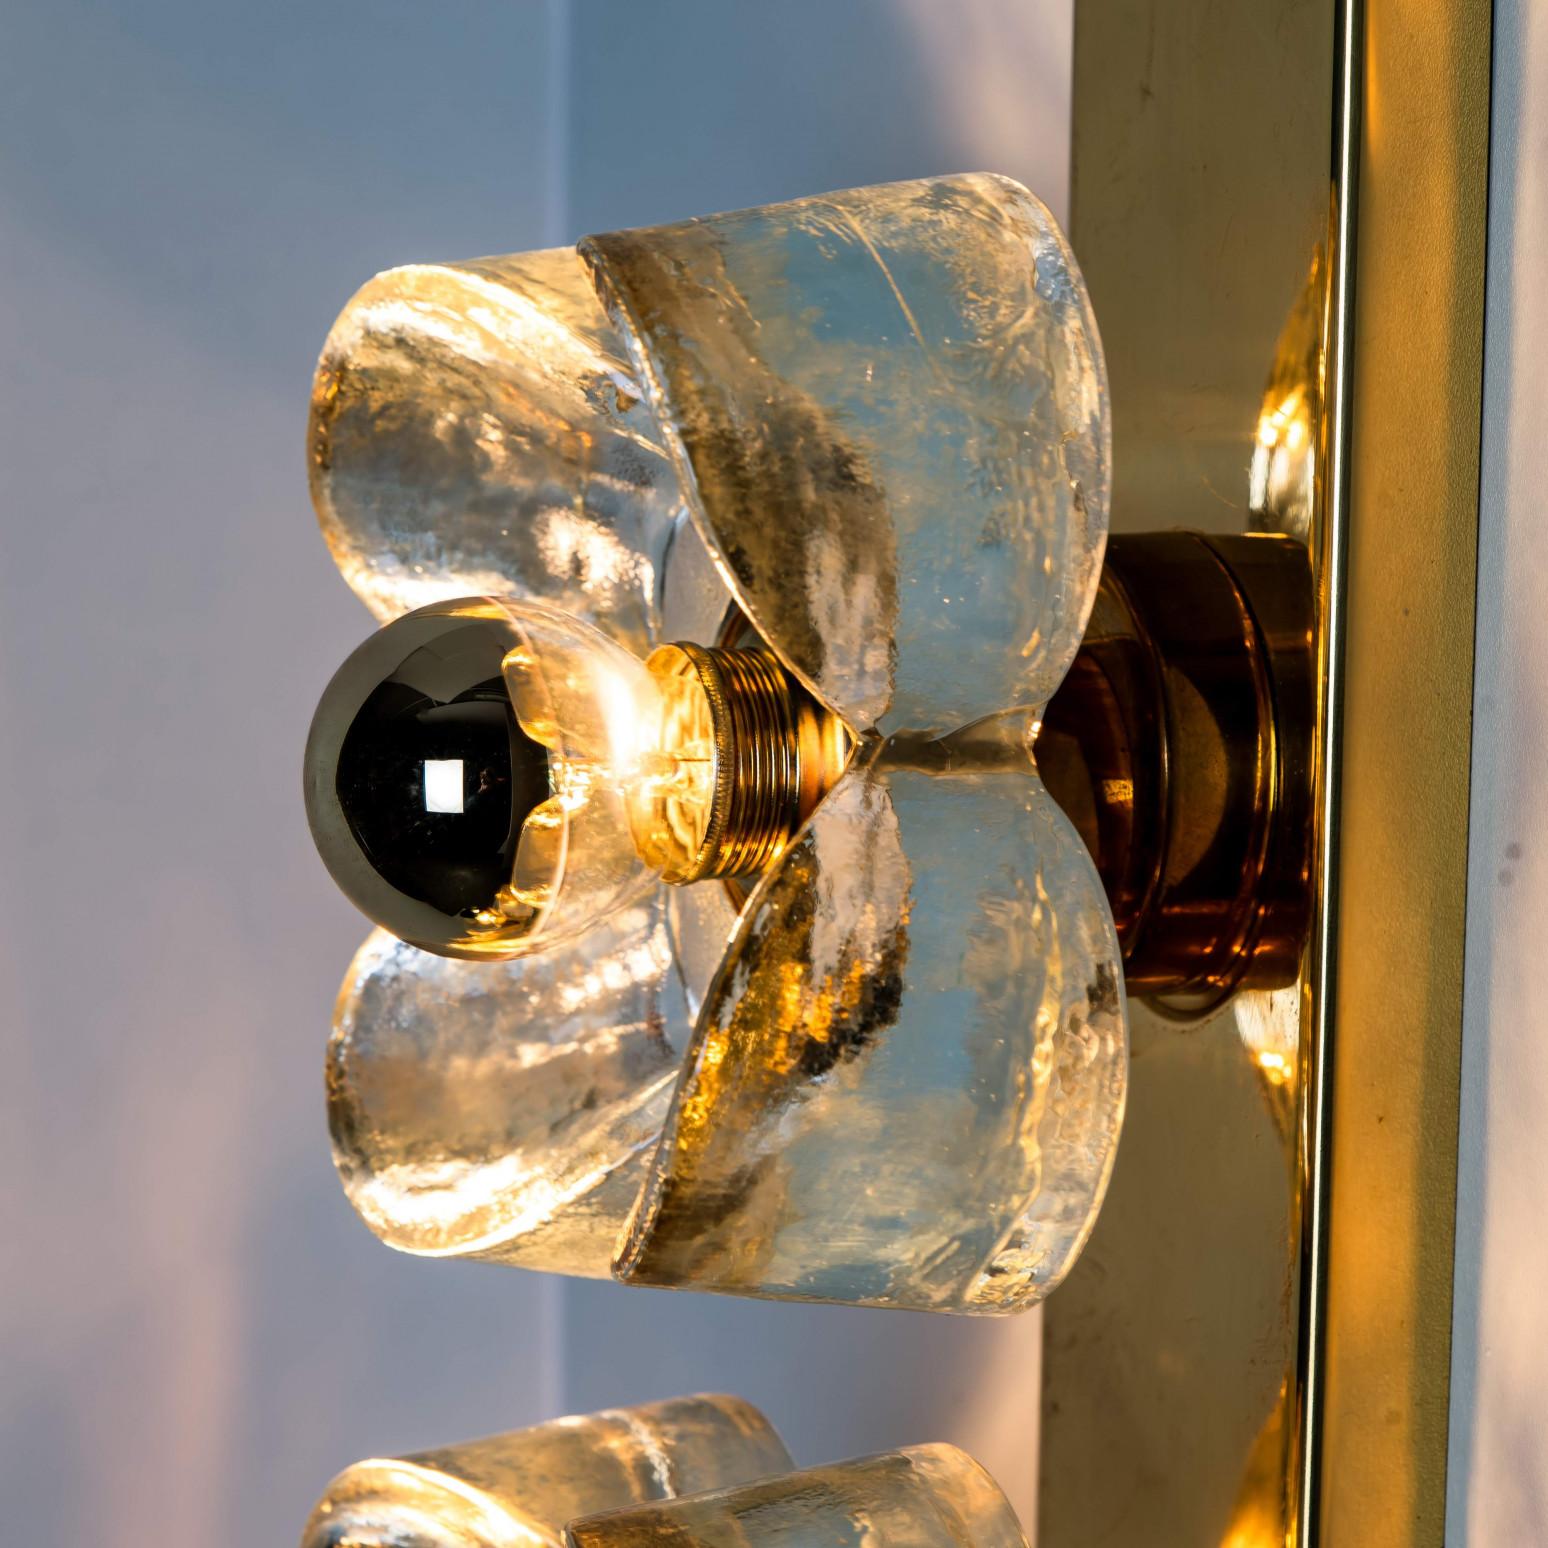 Flower Wall Lights, Brass and Glass by Sische, 1970s, Germany For Sale 1